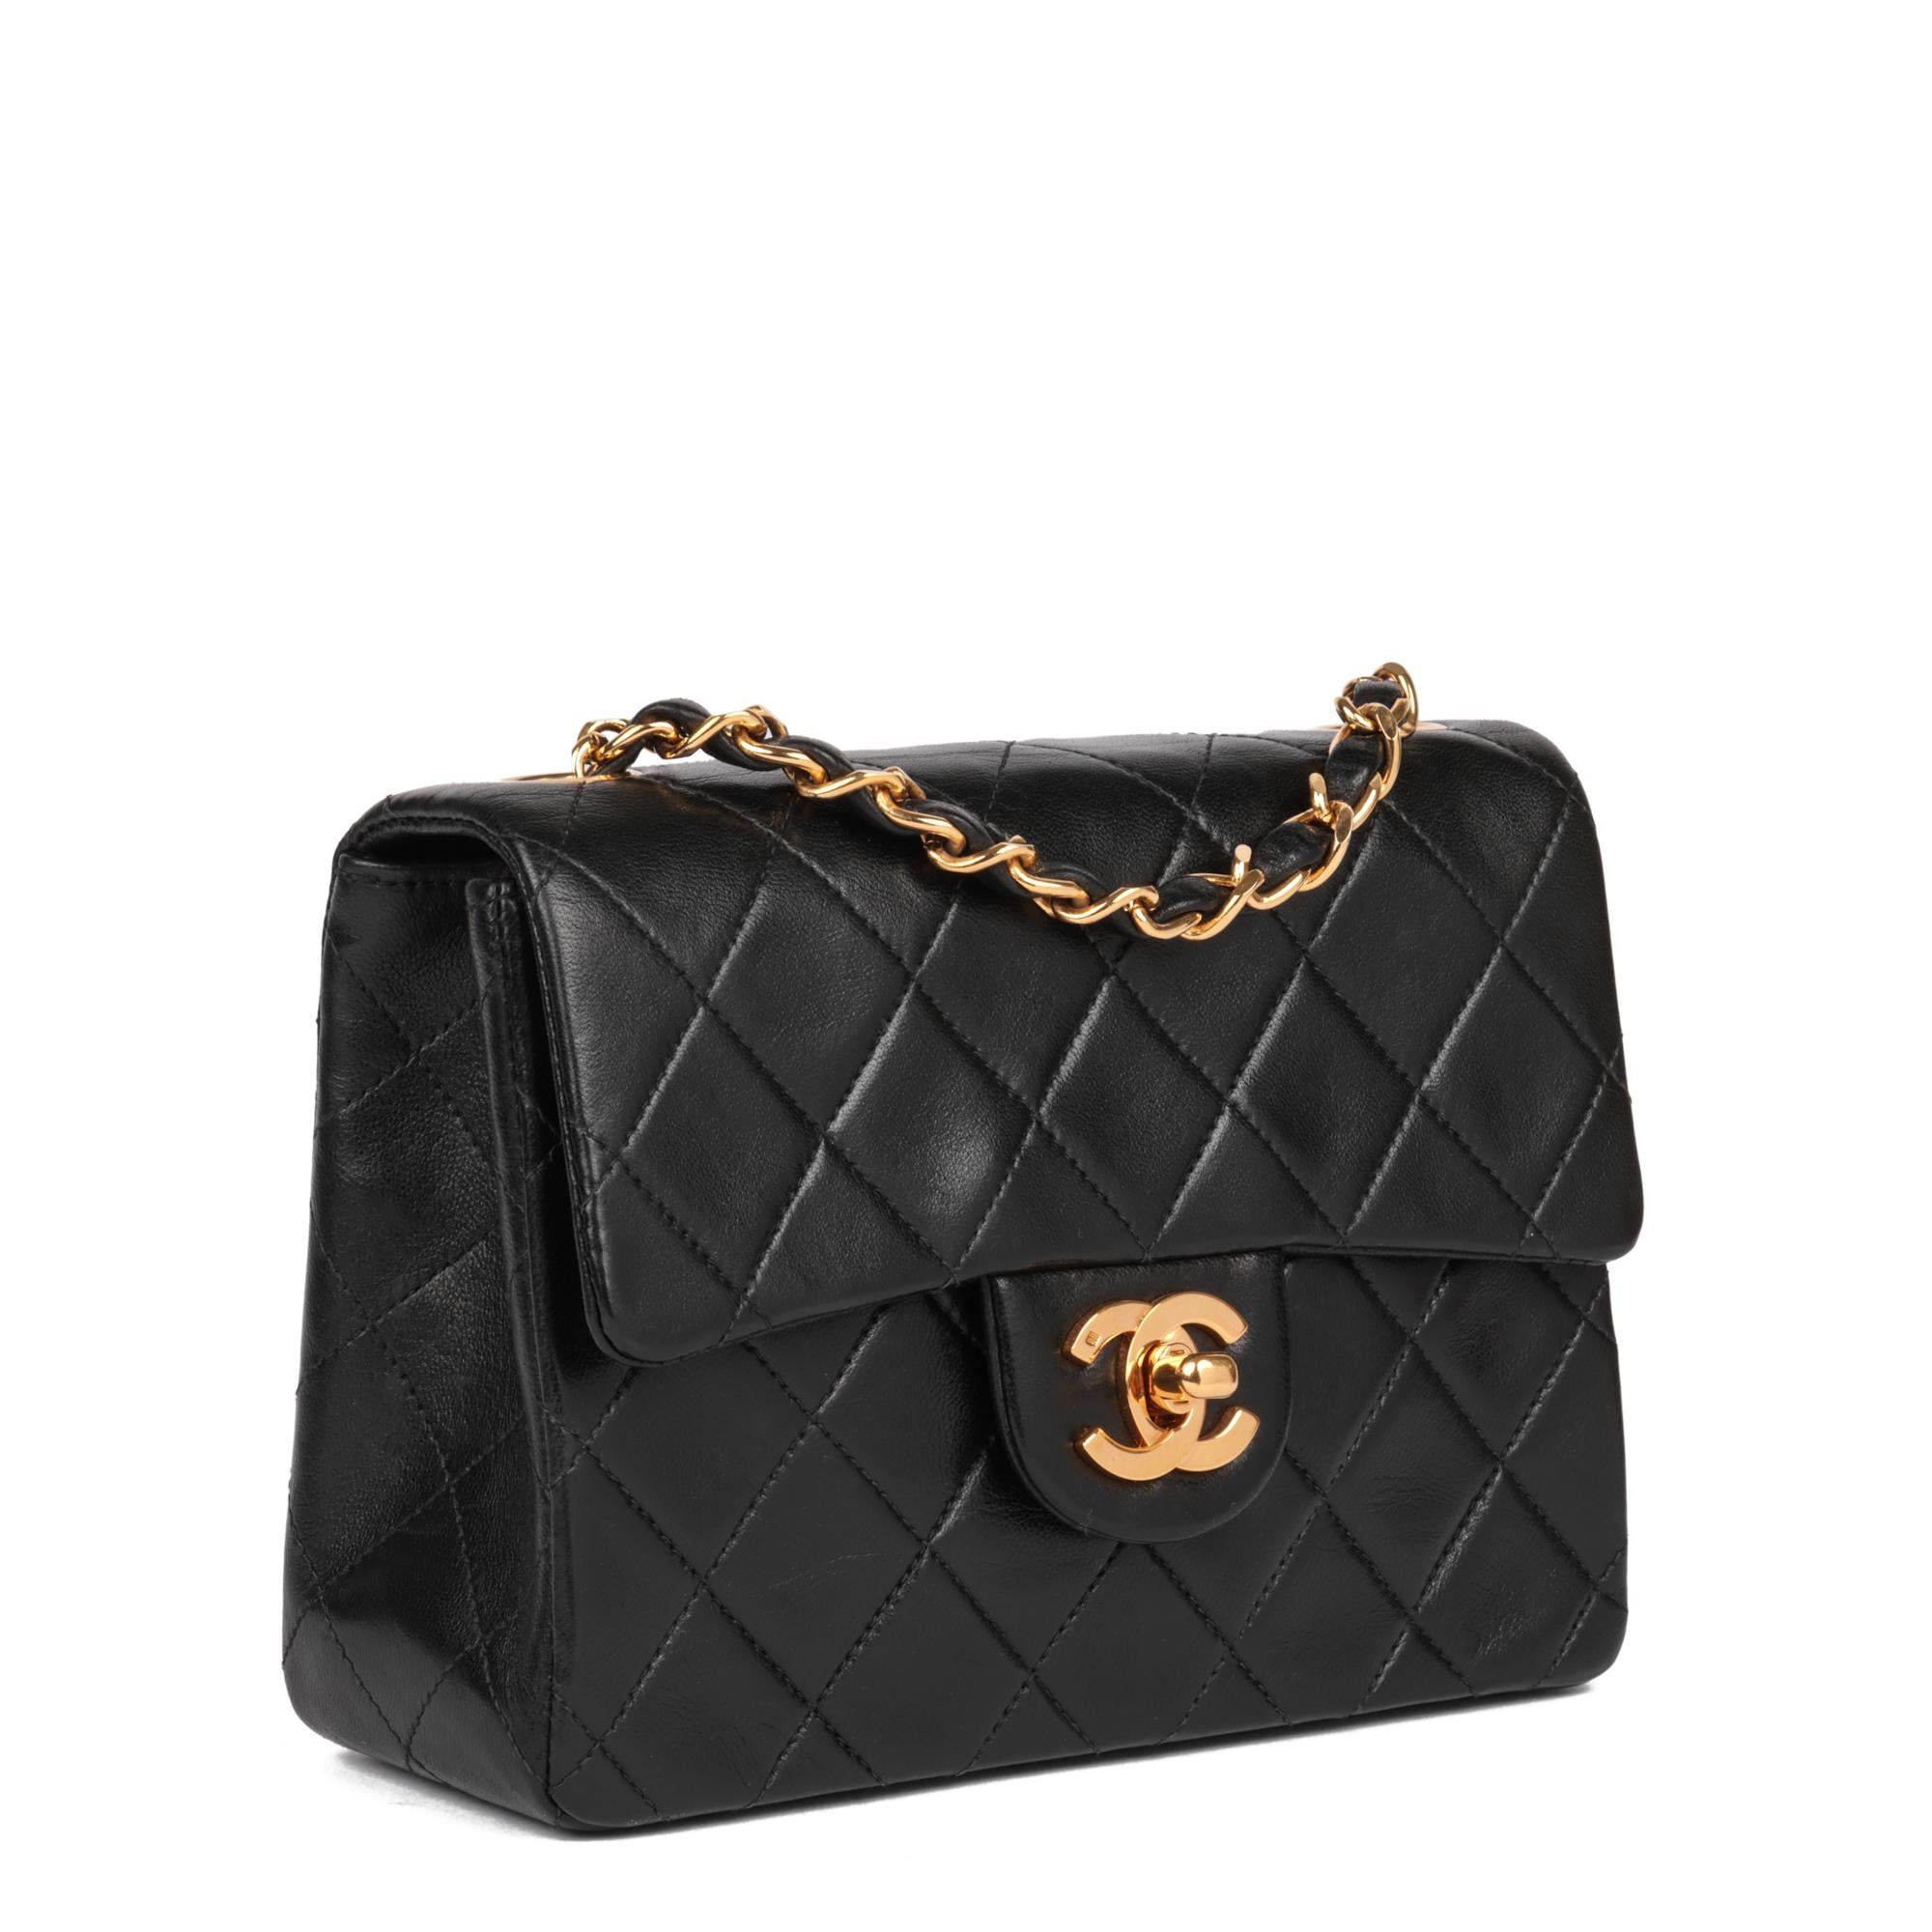 CHANEL
Black Quilted Lambskin Vintage Square Mini Flap Bag

Xupes Reference: HB5232
Serial Number: 2025935
Age (Circa): 1991
Accompanied By: Chanel Dust Bag, Authenticity Card
Authenticity Details: Authenticity Card, Serial Sticker (Made in